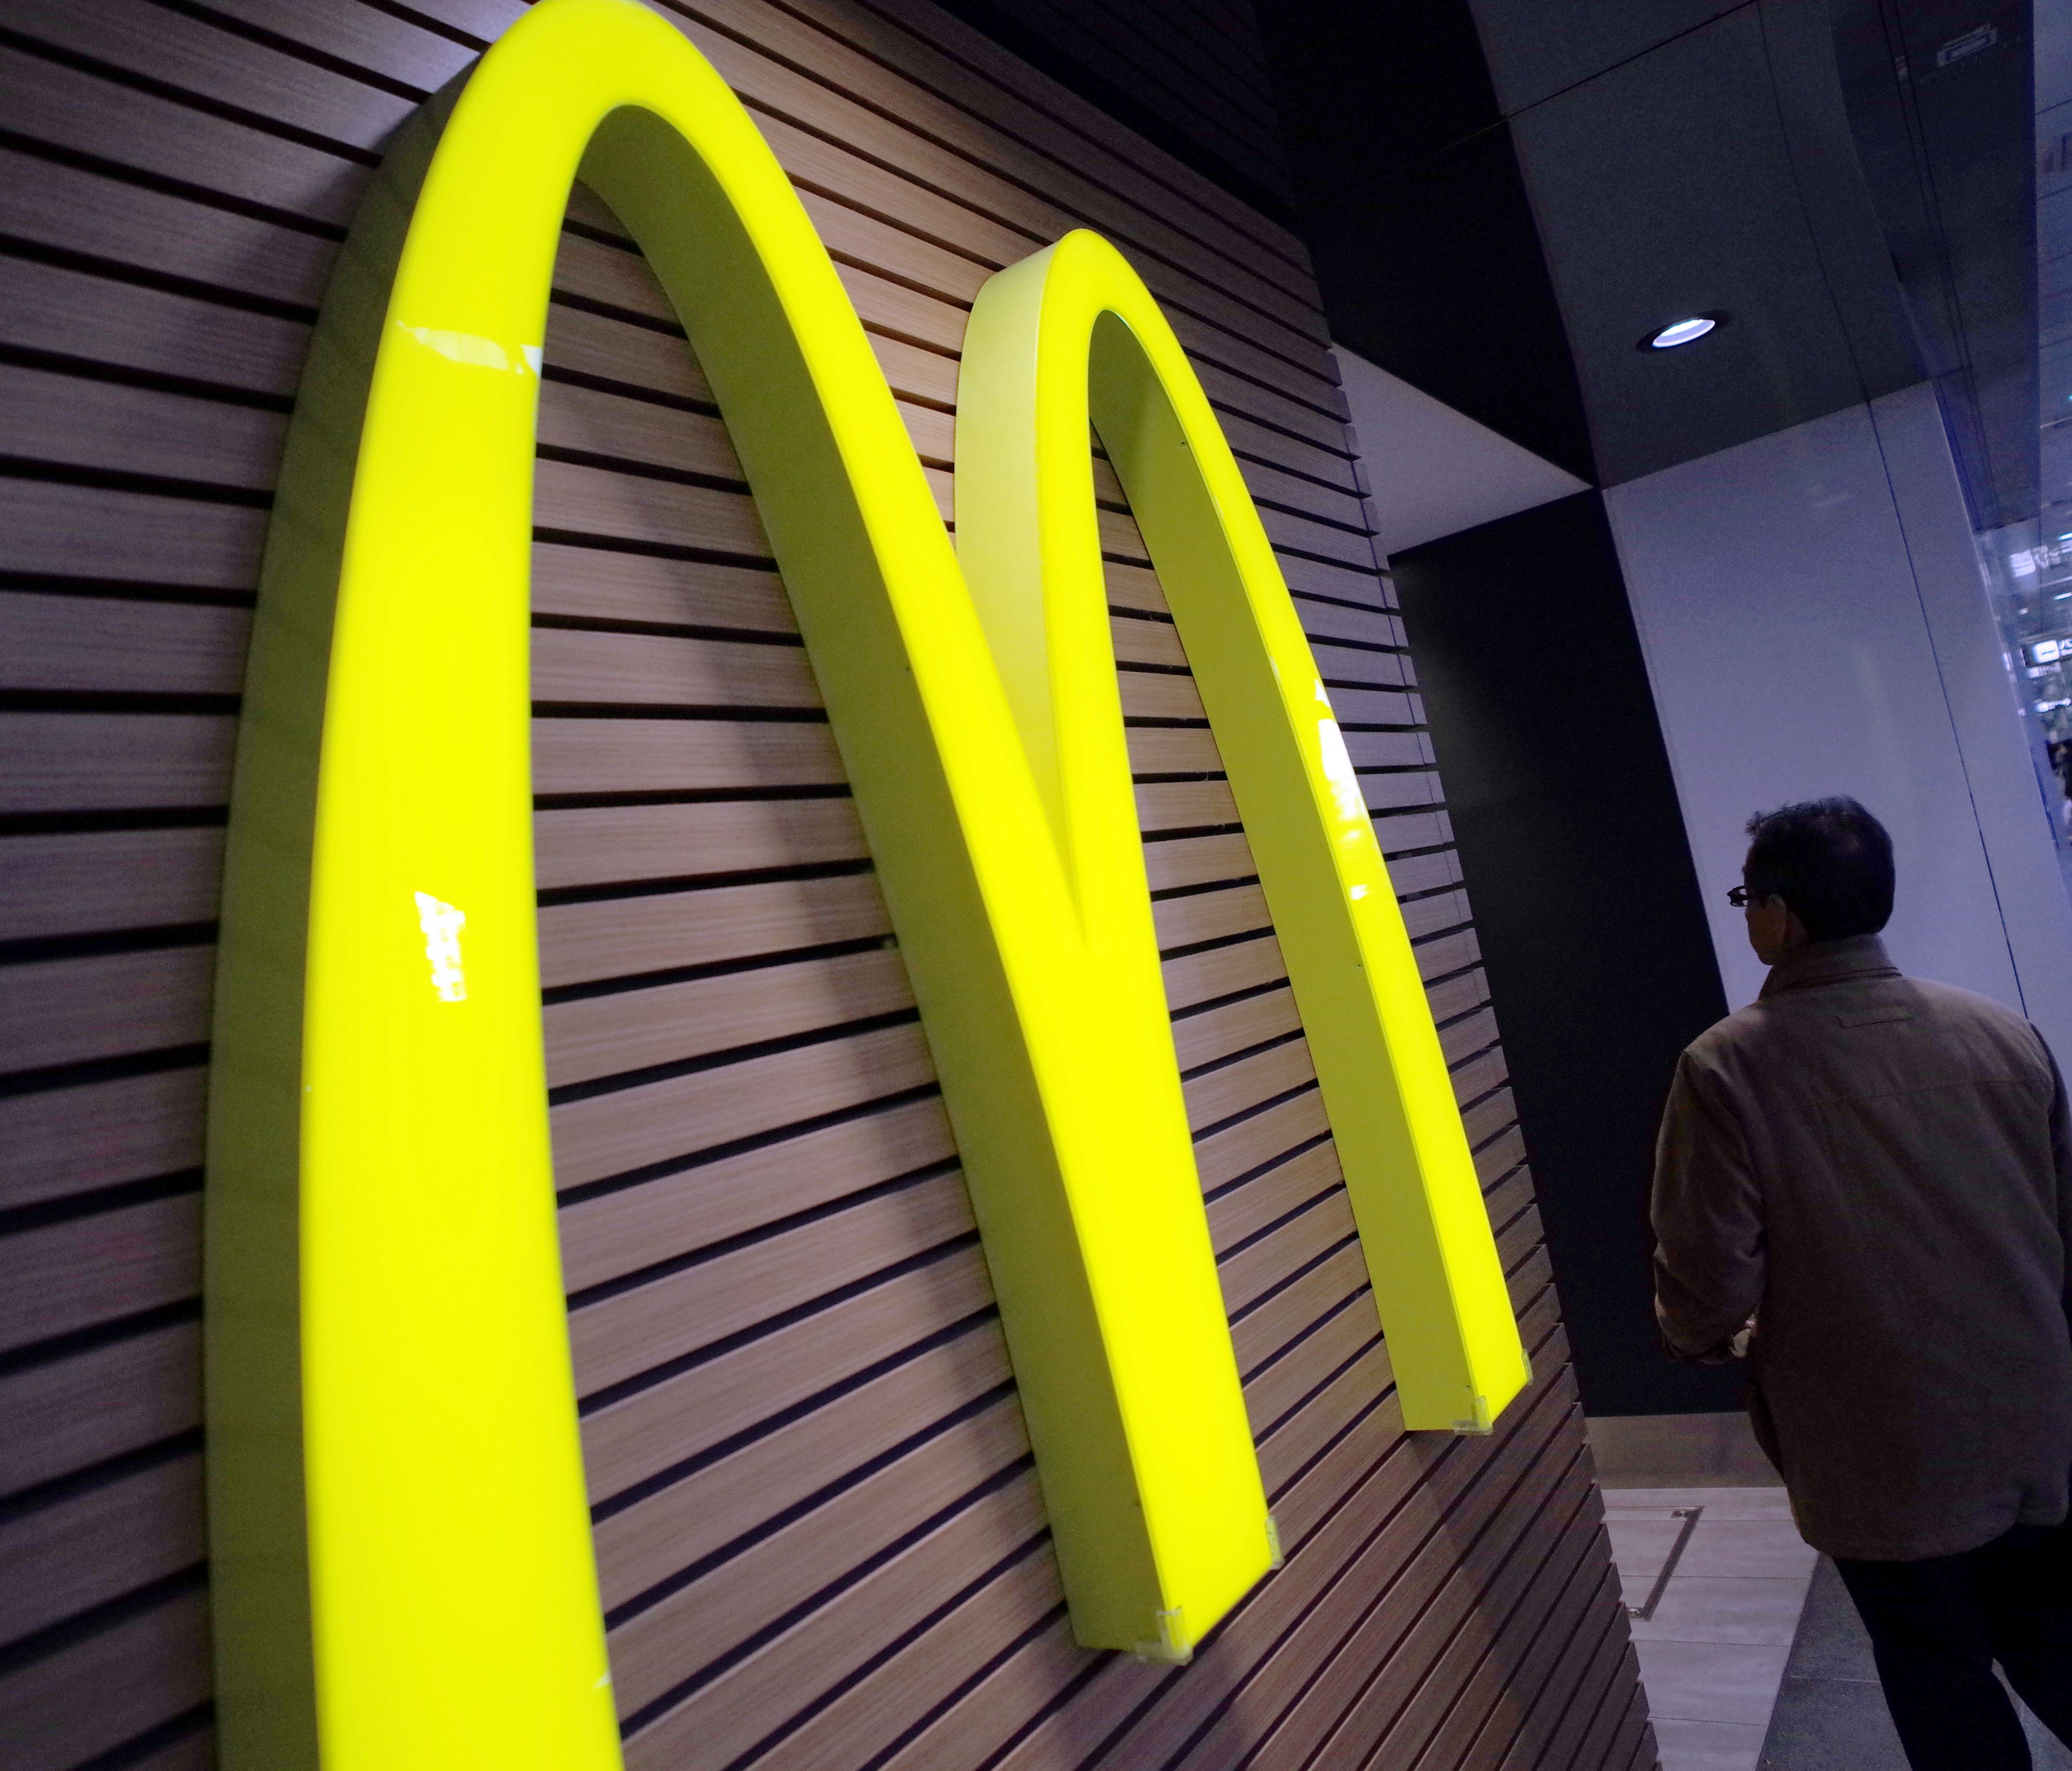 McDonald's will start offering soft drinks for just one dollar, Bloomberg reports.